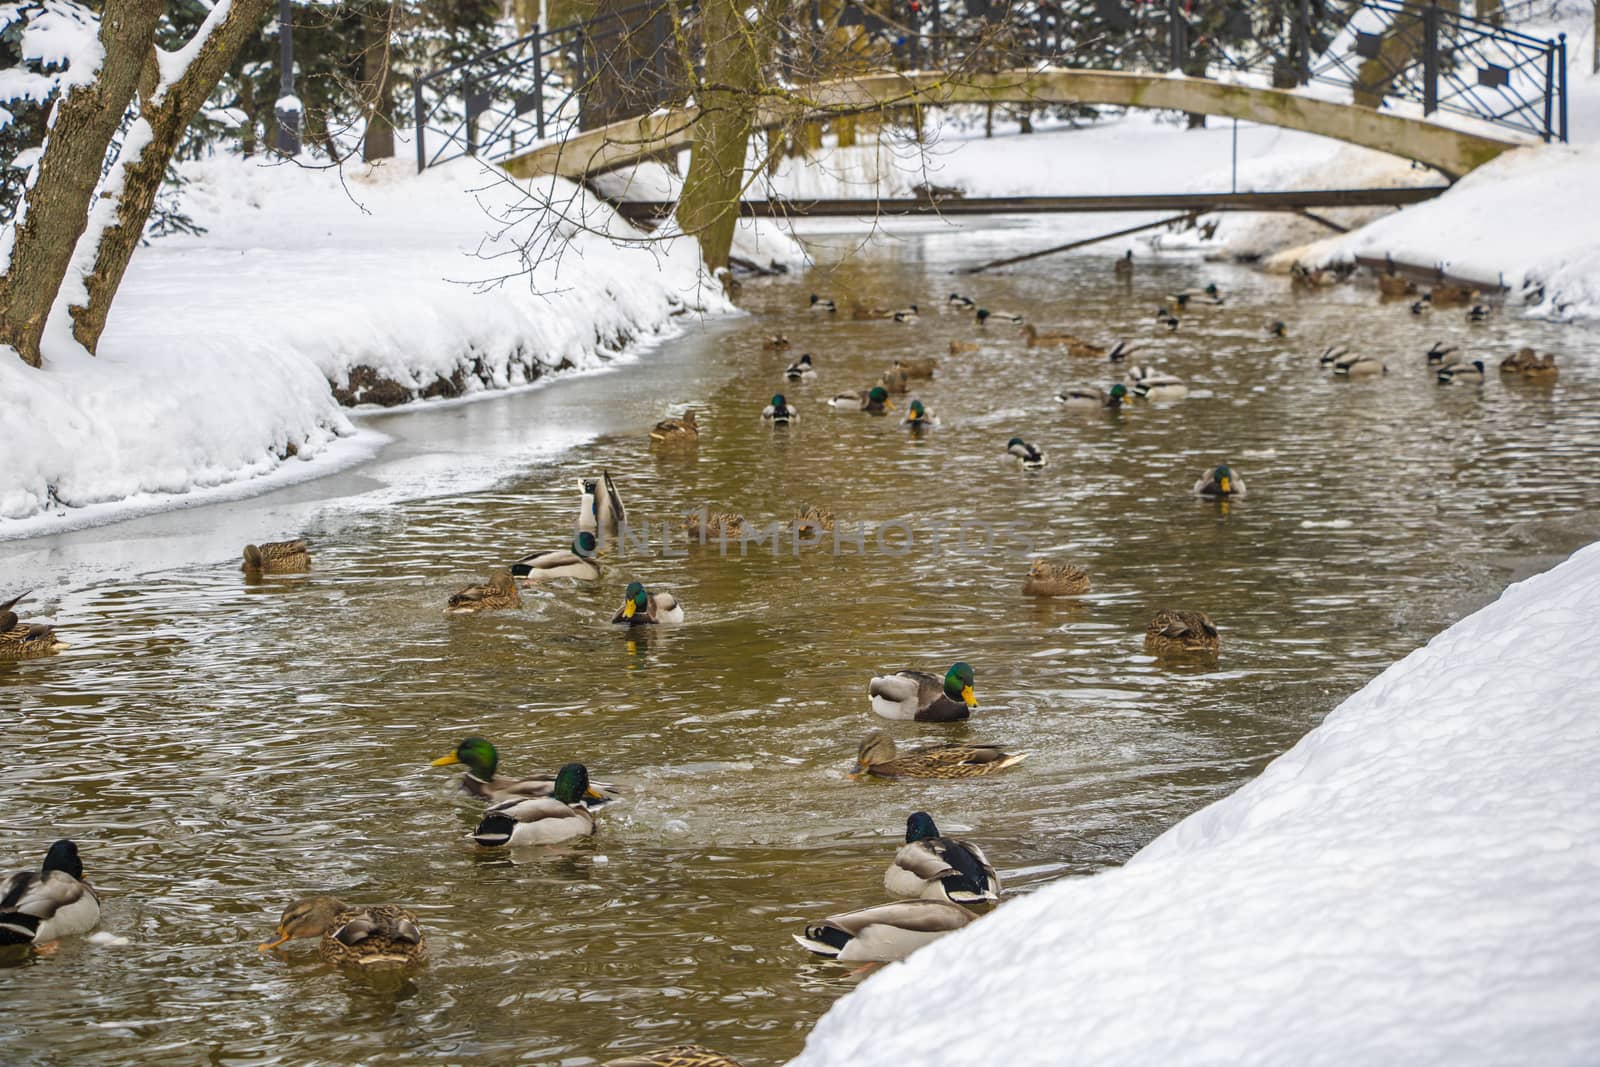 A large group of mallard ducks swim in the cold water of a pond on a sunny winter day in rural Wisconsin in the winter season by kip02kas